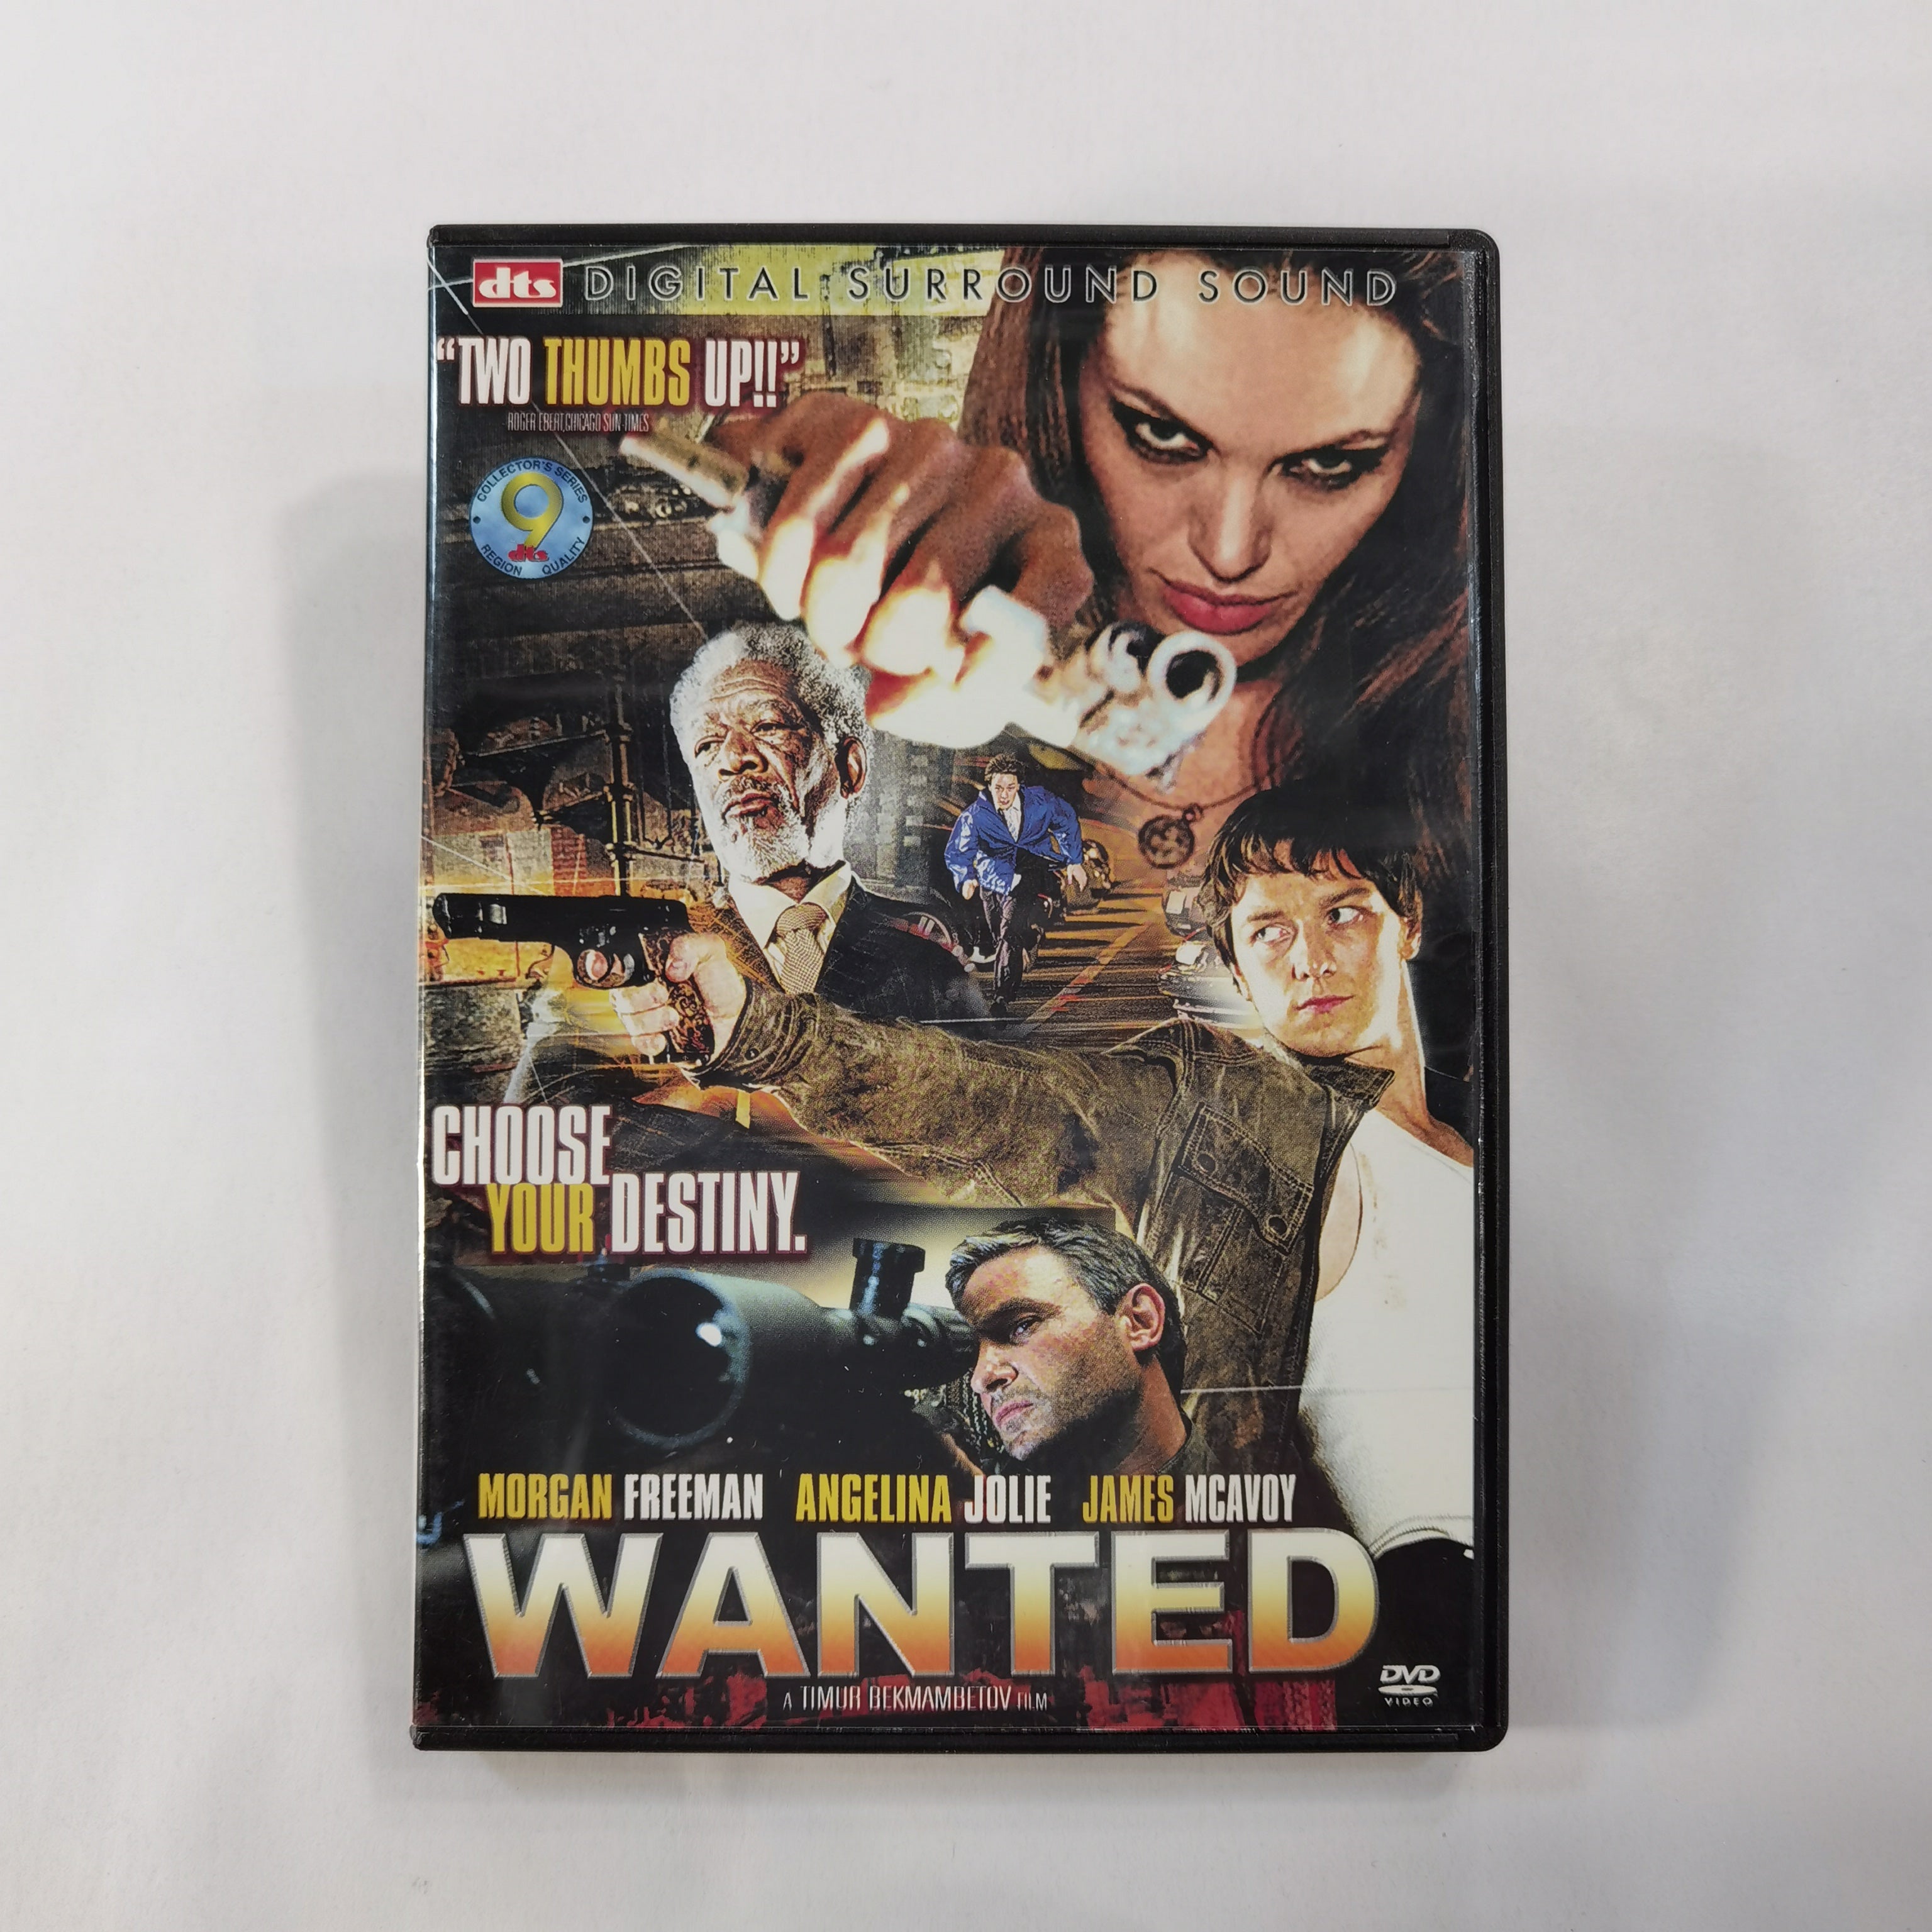 Wanted (2008) - DVD